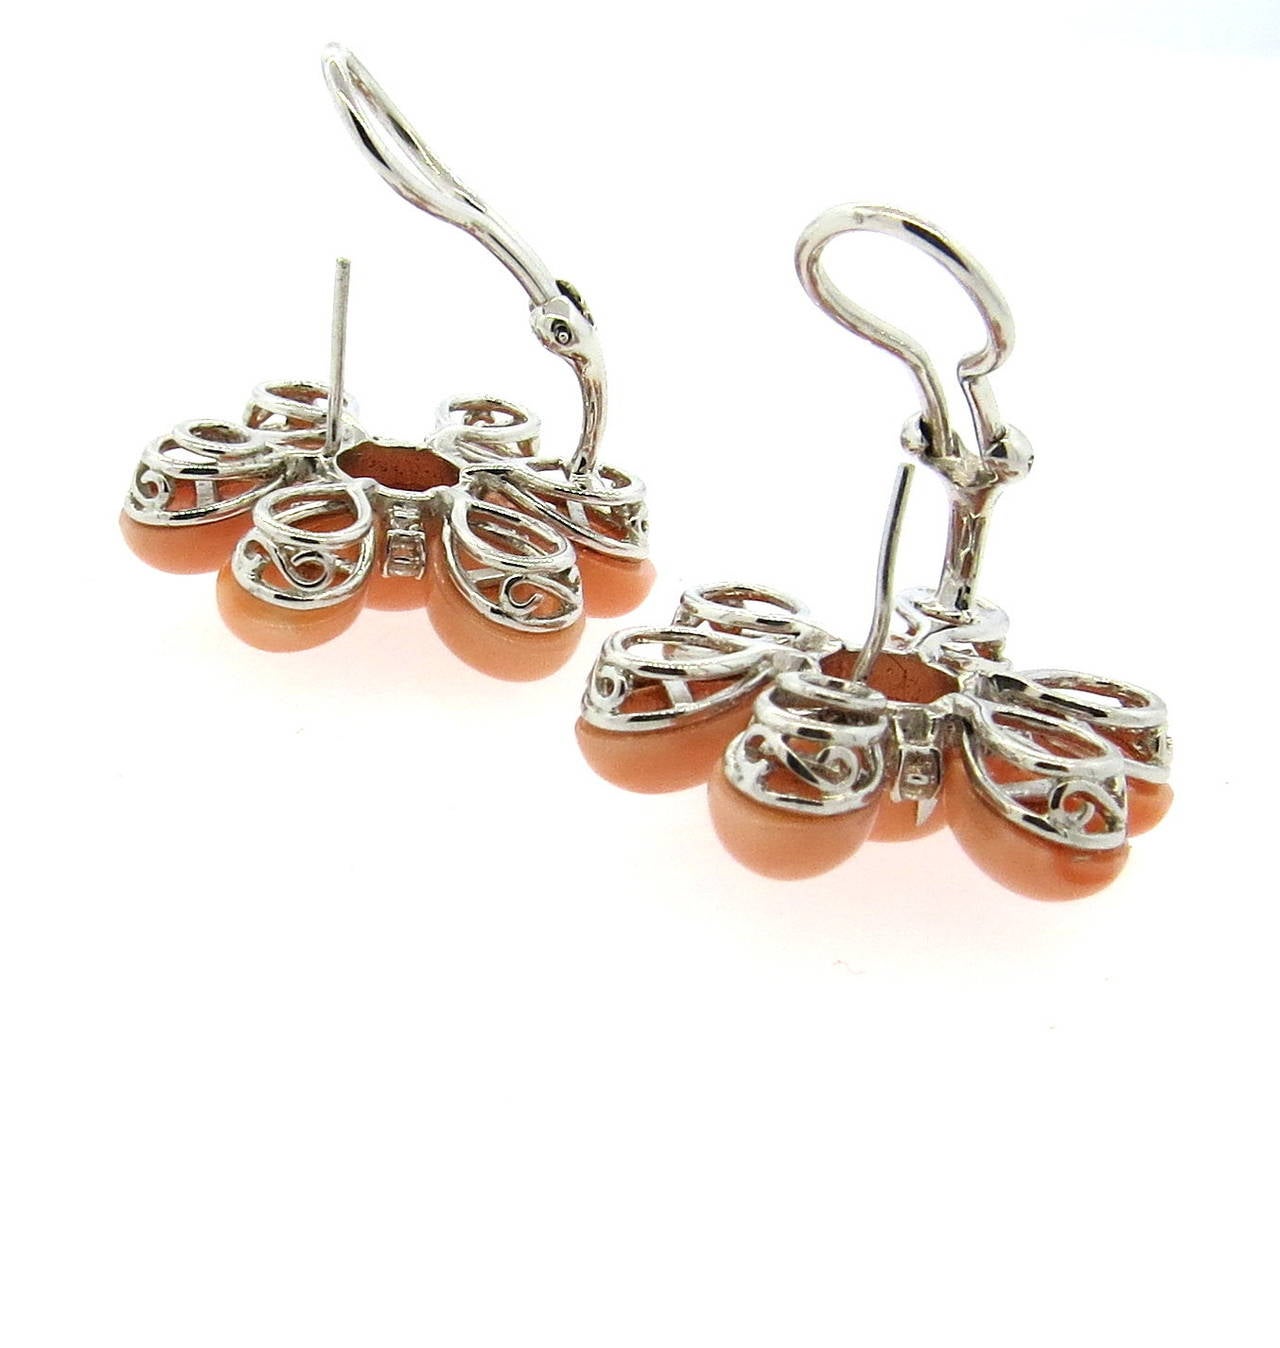 18k gold earrings, set with coral stones and approximately 0.48ctw in diamonds, featuring flower motif design. Earrings are 28mm x 28mm. Weight - 18.5 grams